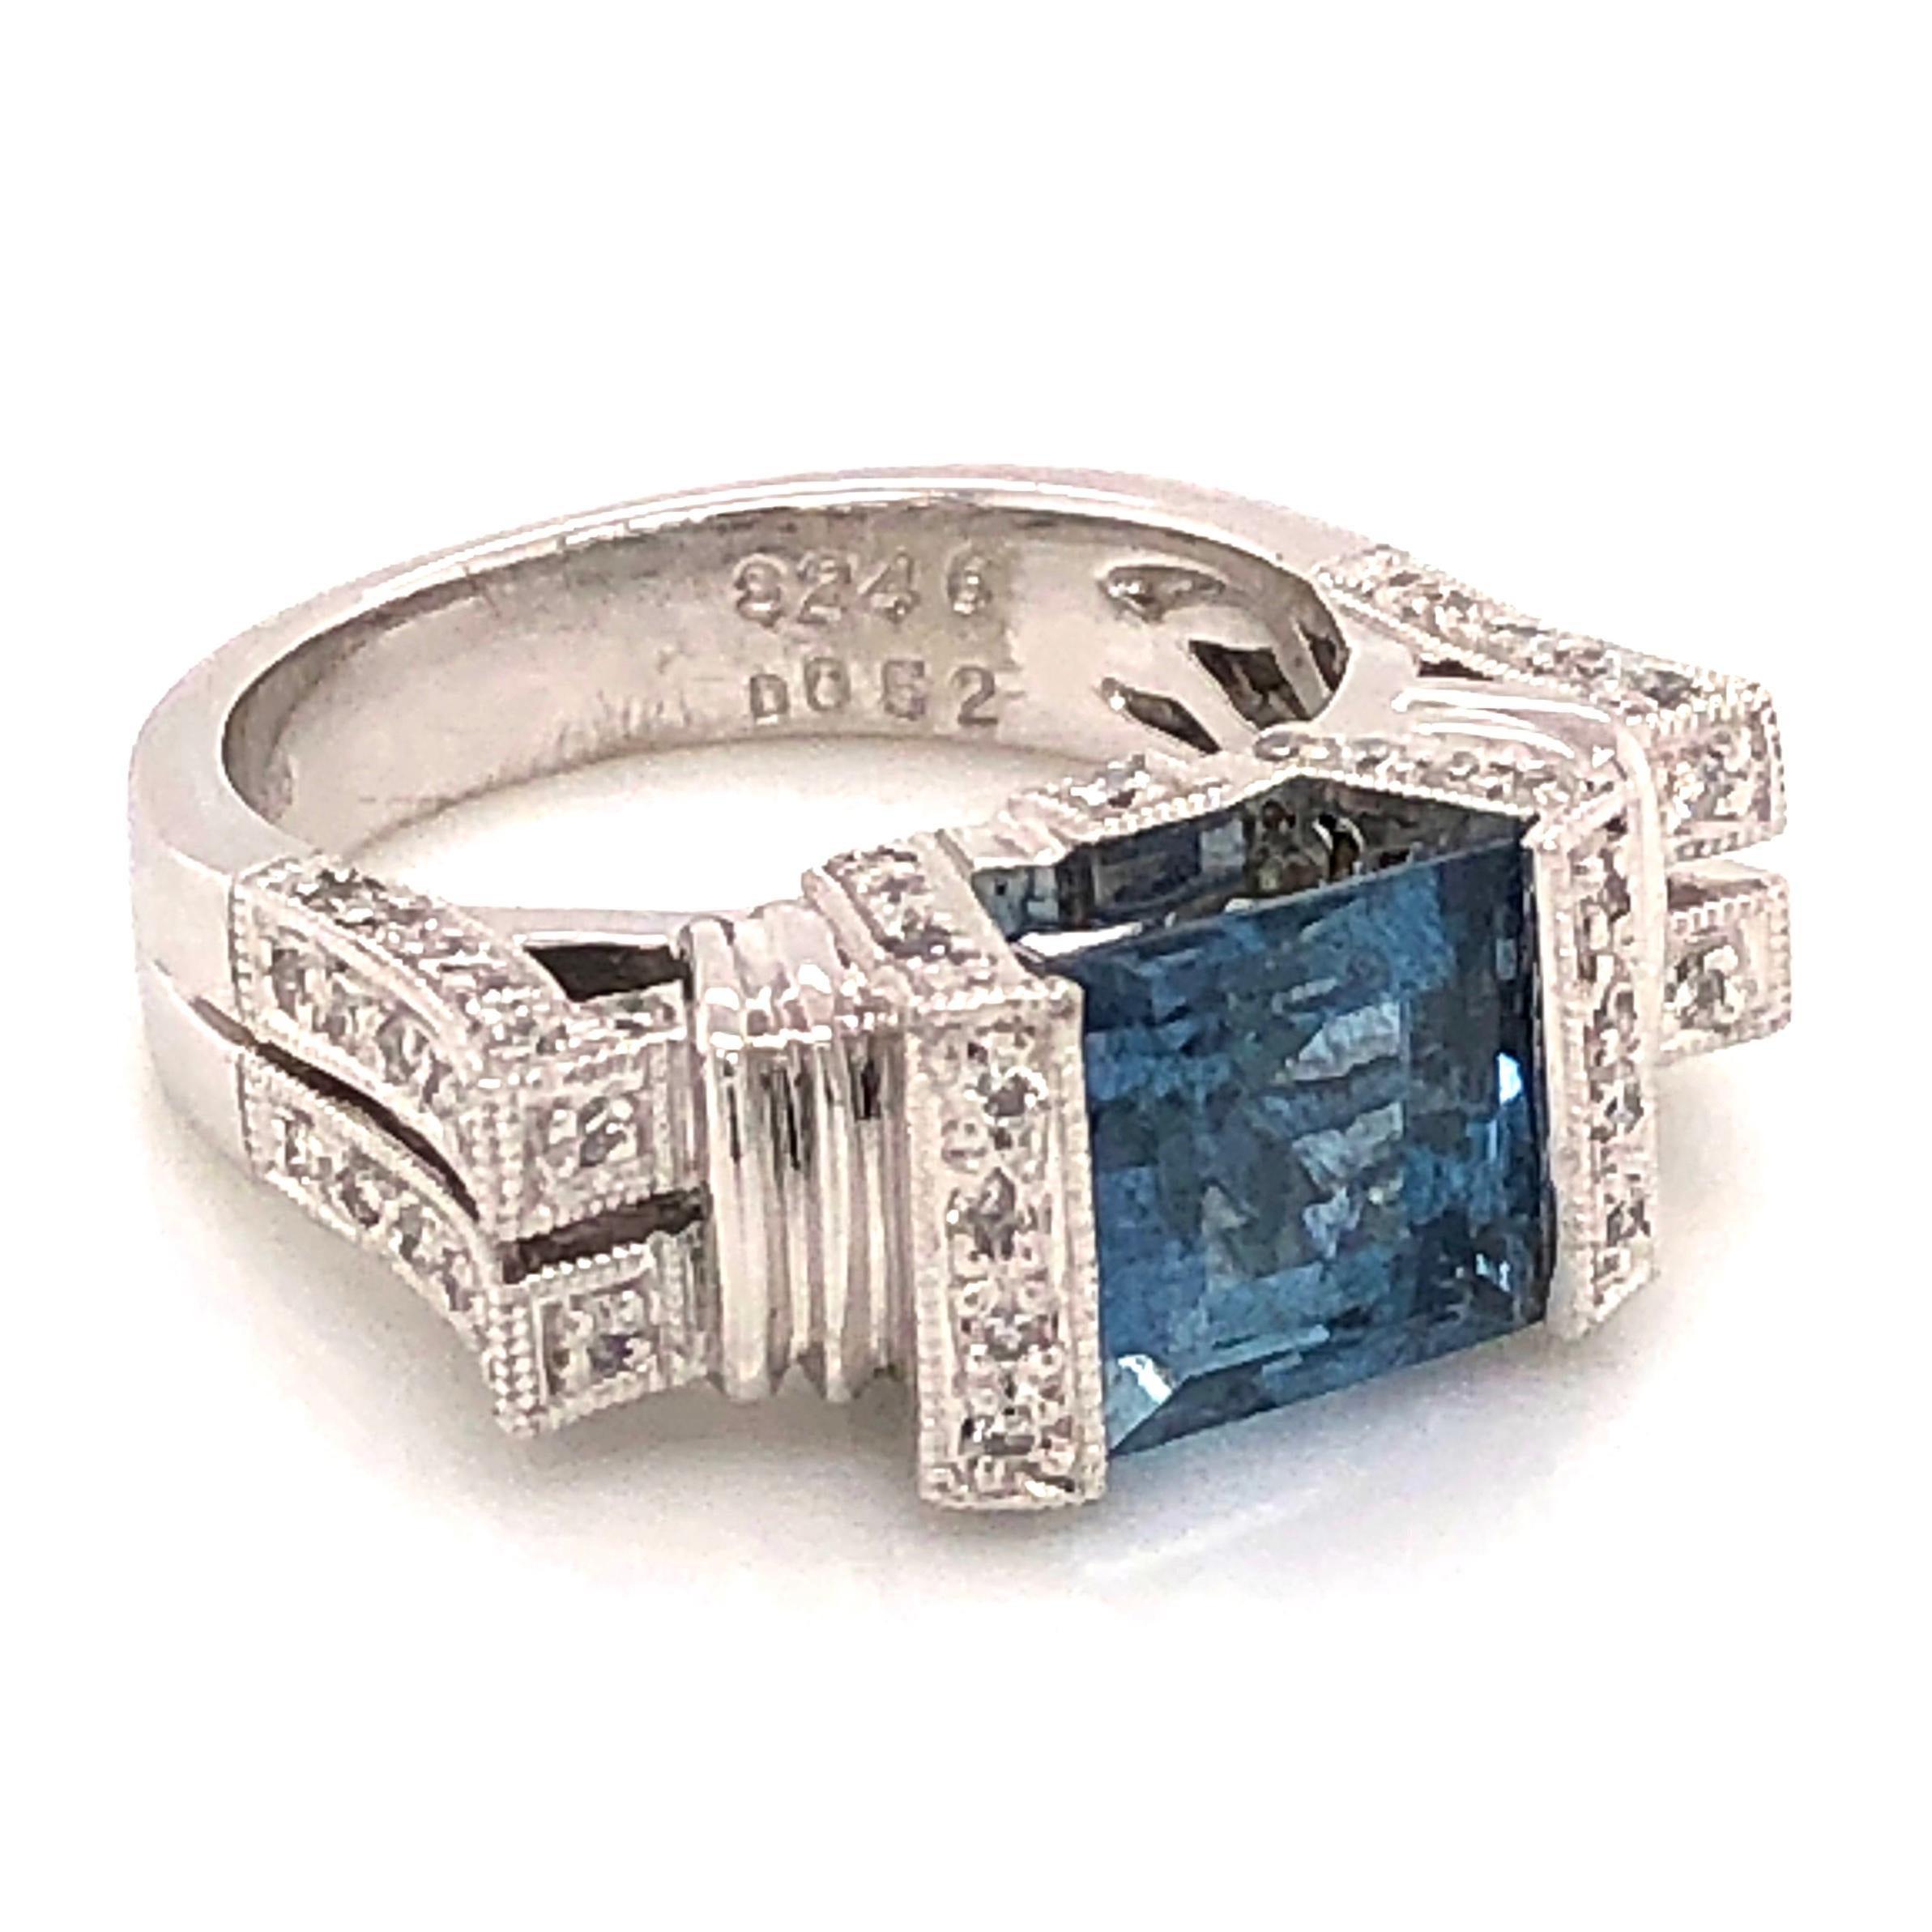 Simply Beautiful! Finely crafted Square and Diamond Ring. Centering an amazing Hand set securely nestled Square Deep Aquamarine weighing approx. 2.46 Carat with Diamonds on either side and on shank, weighing approx. 0.52tcw. Ring size: 6.25, we